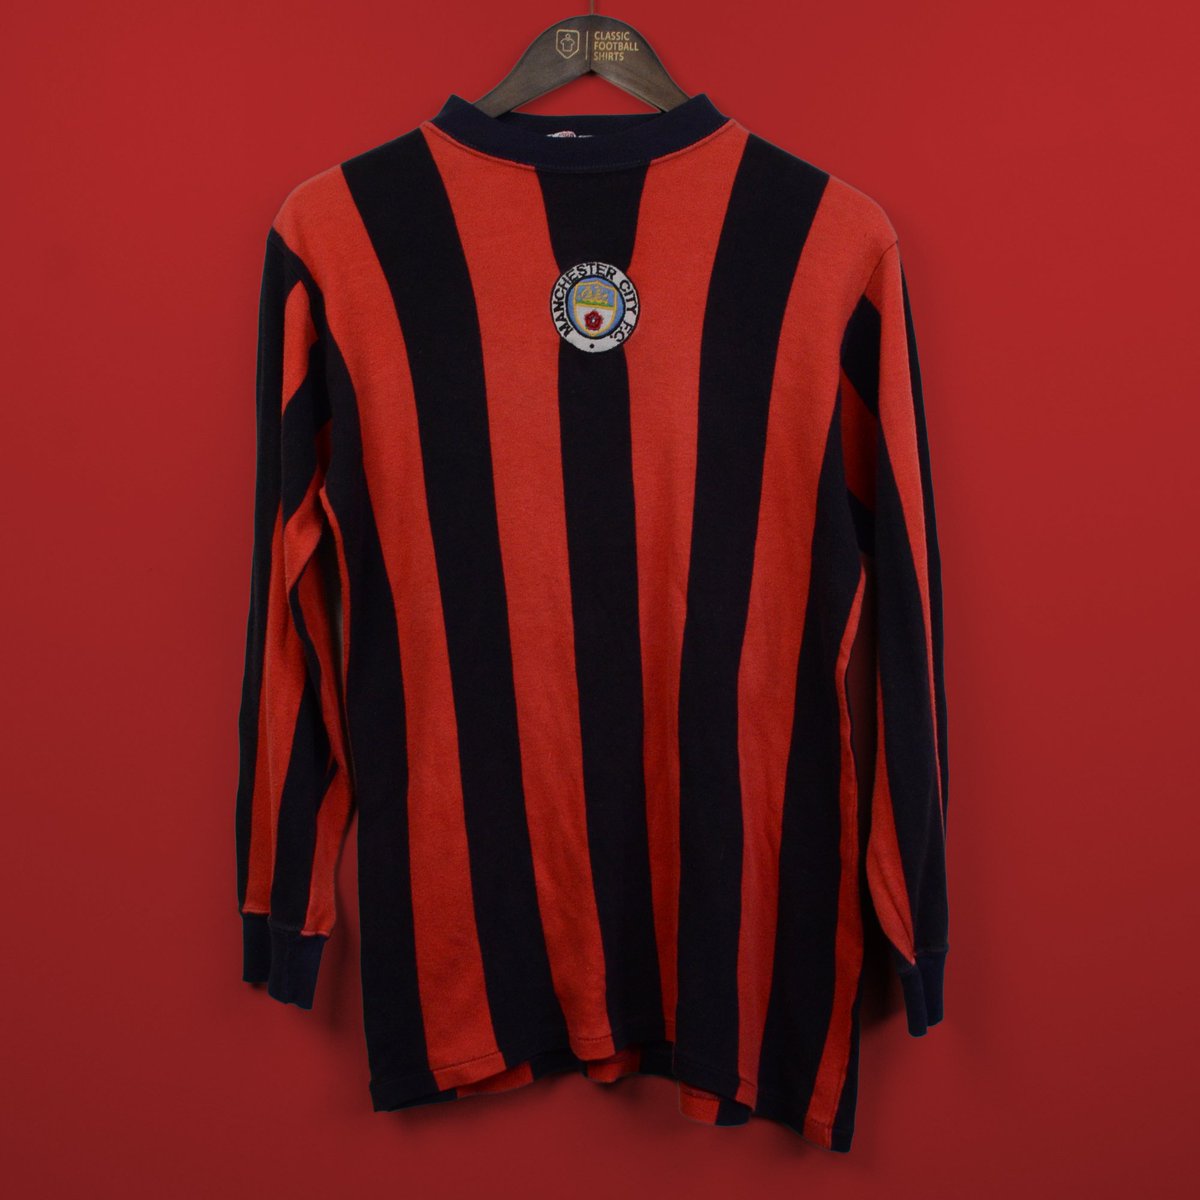 man city red and black kit